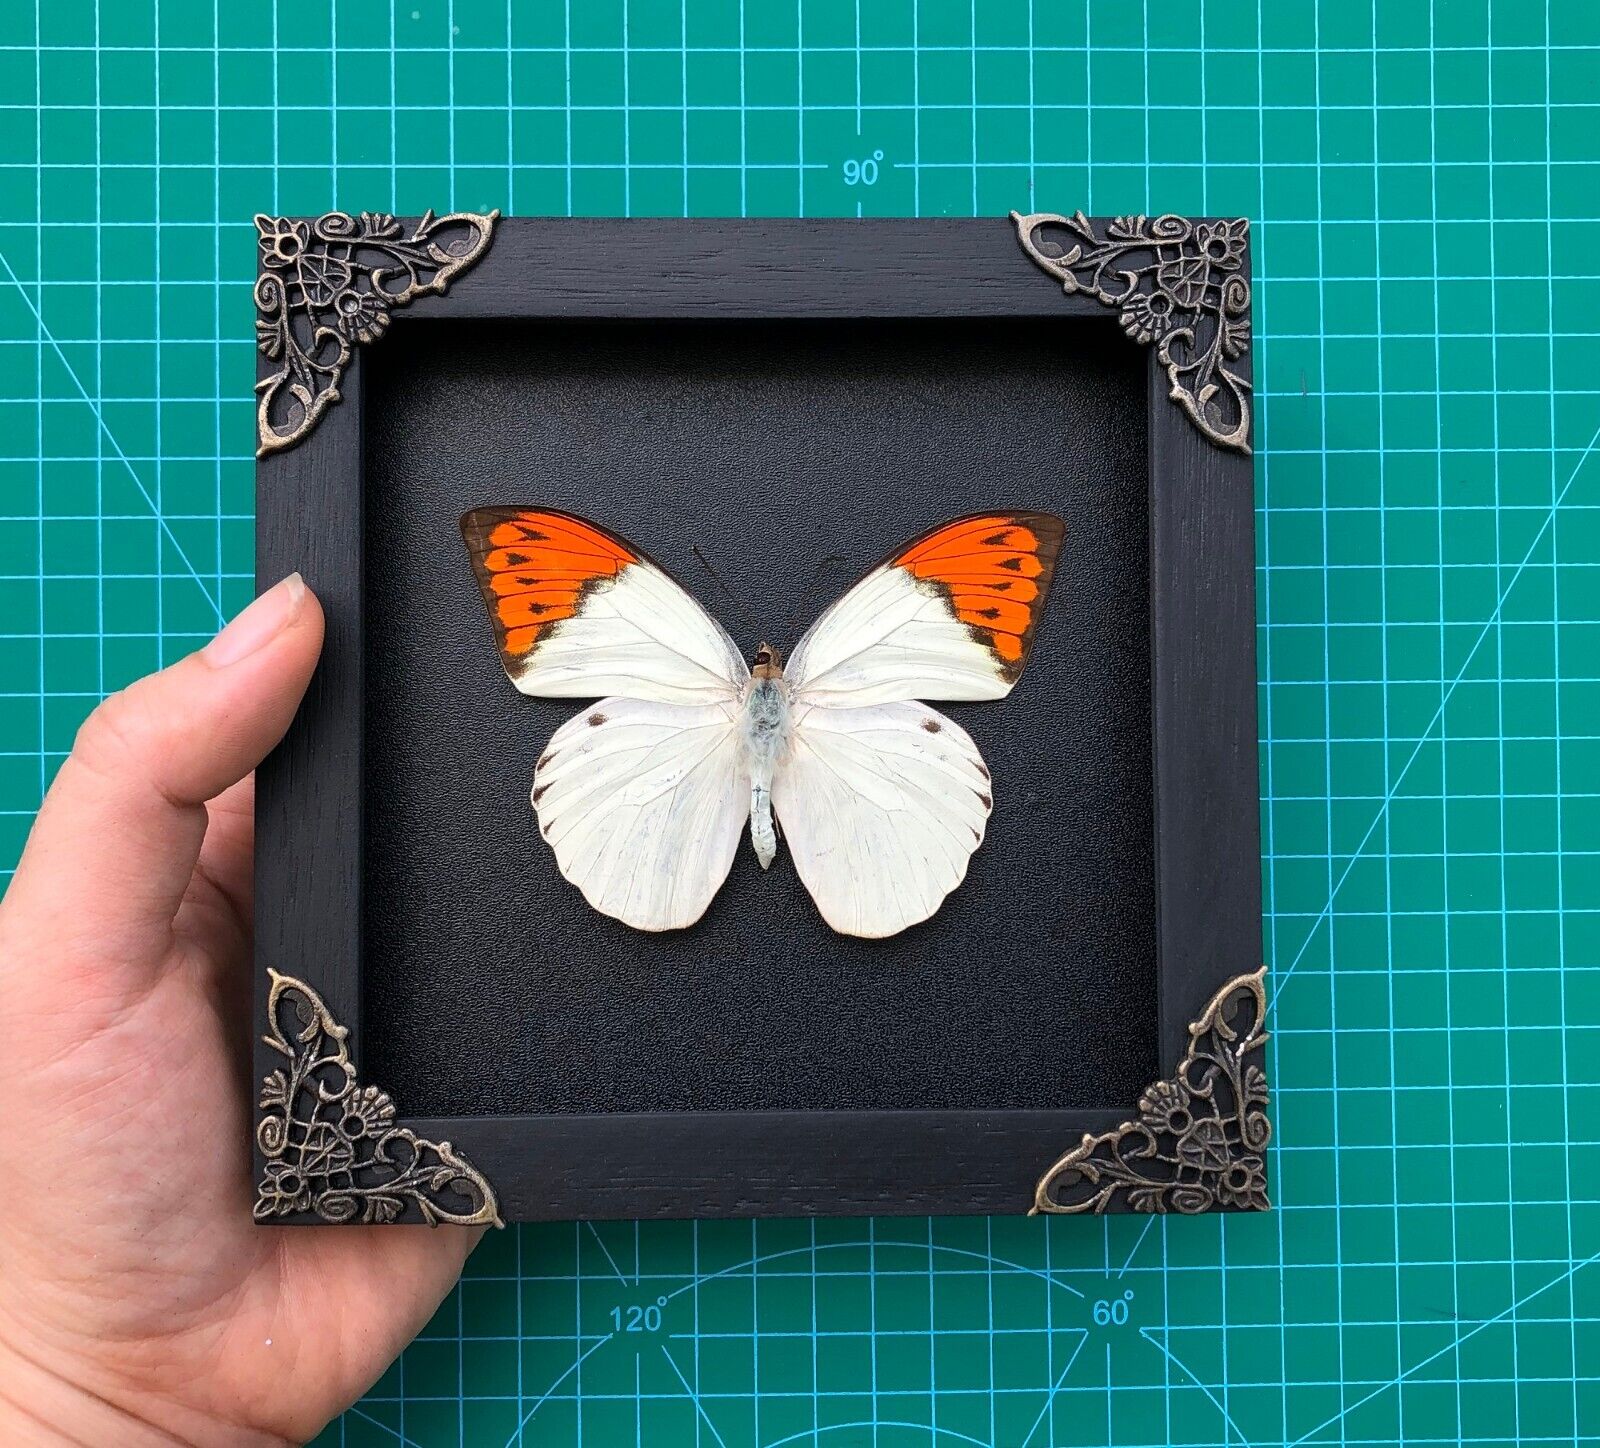 Real Butterfly Framed for Moon Shelf Wall Decor Taxidermy Insect Collections